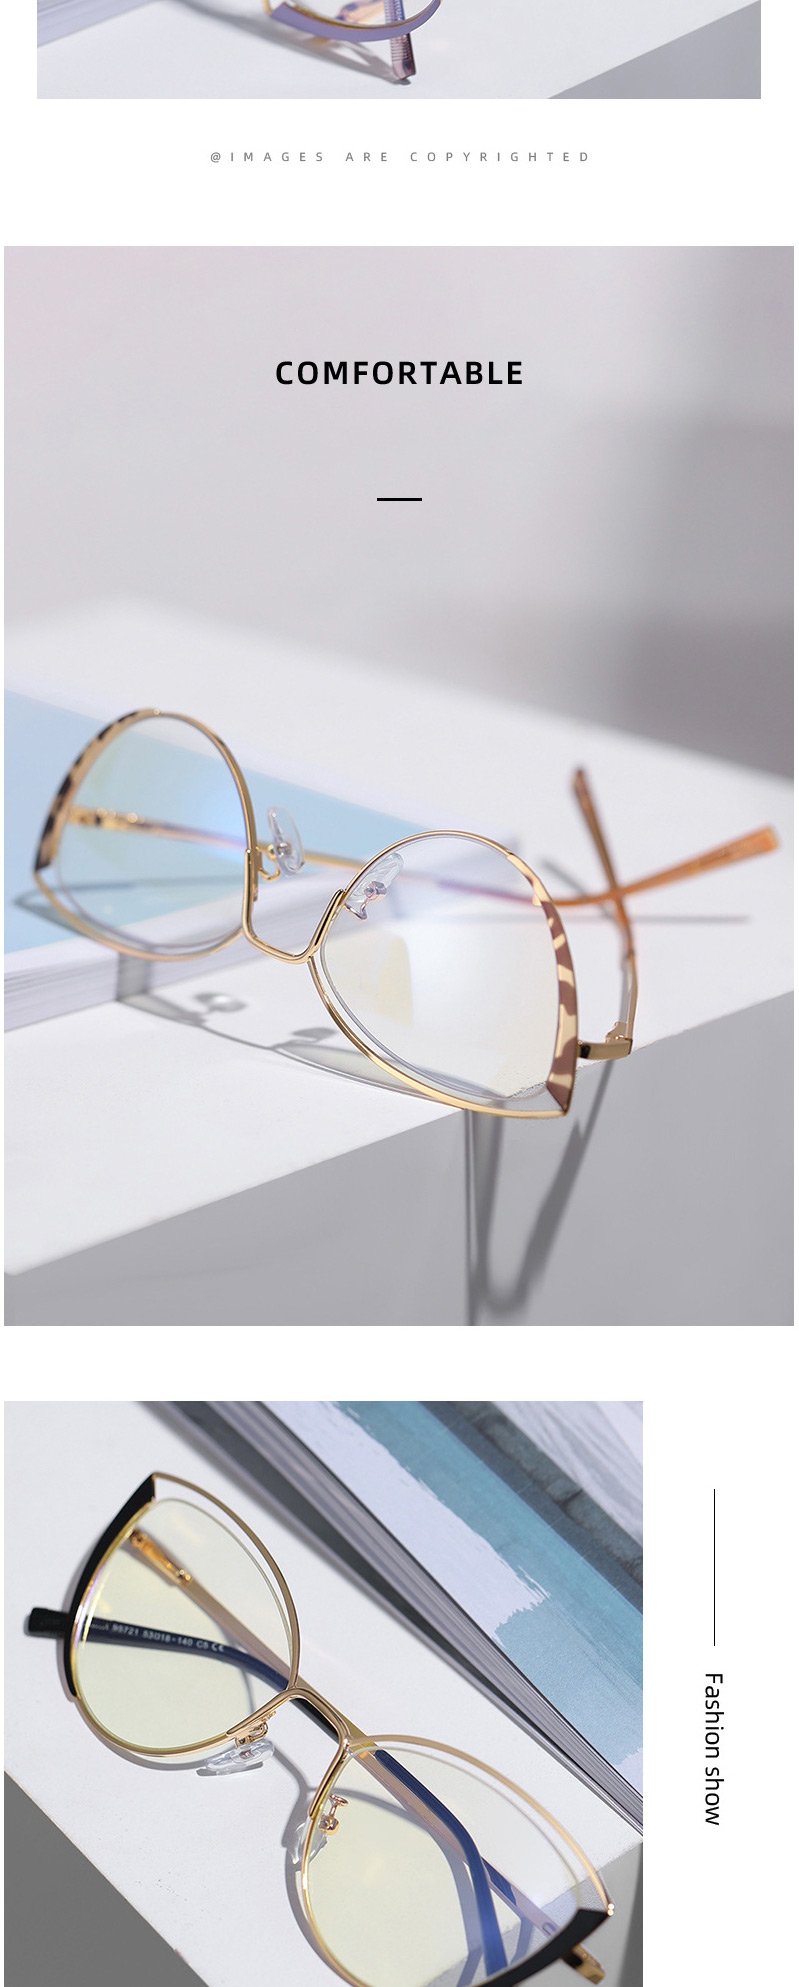 Fashion C3 Violet/anti-blue Light Anti-blue Light Can Be Equipped With Myopia Metal Flat Mirror,Fashion Glasses